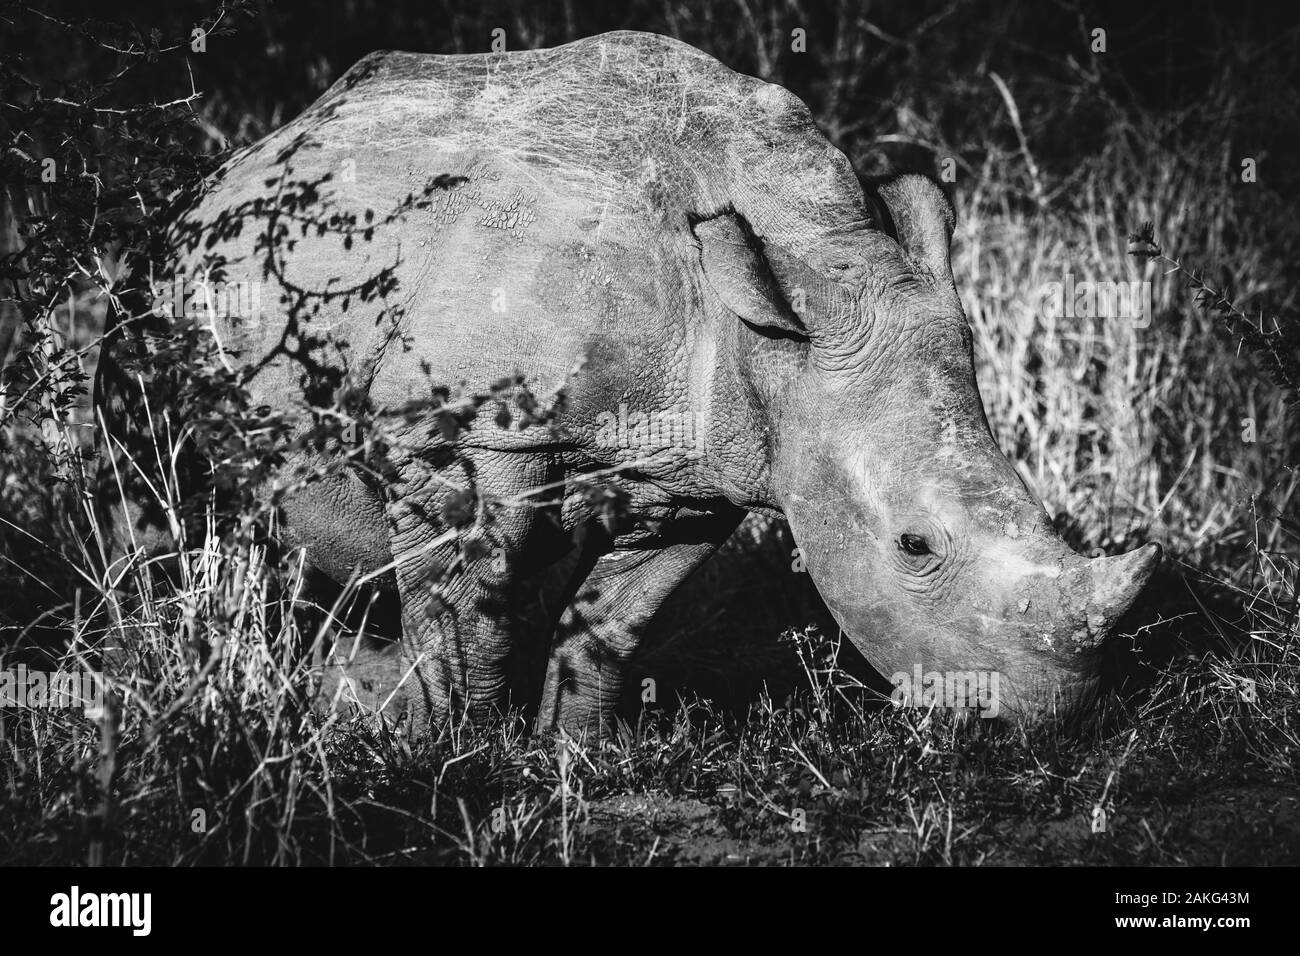 A rhino eating grass in the Hluhluwe - Imfolozi National Park, South Africa Stock Photo